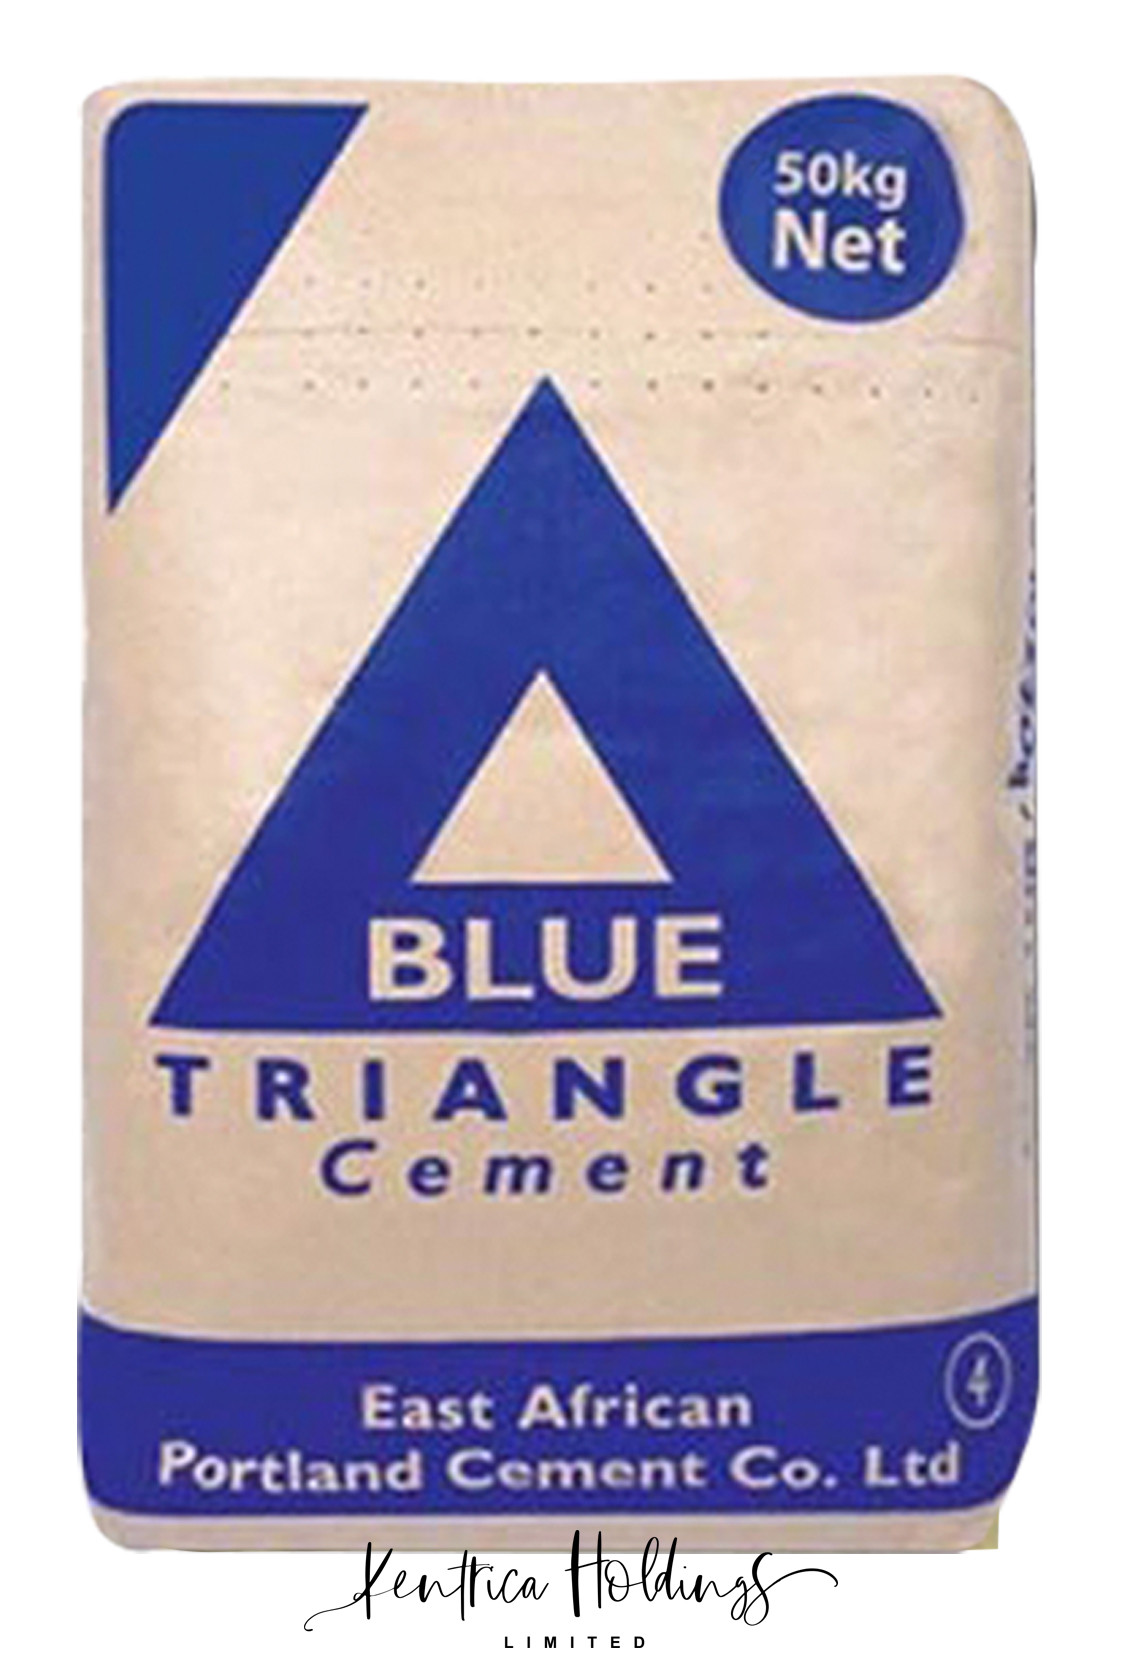 BLUE TRIANGLE CEMENT